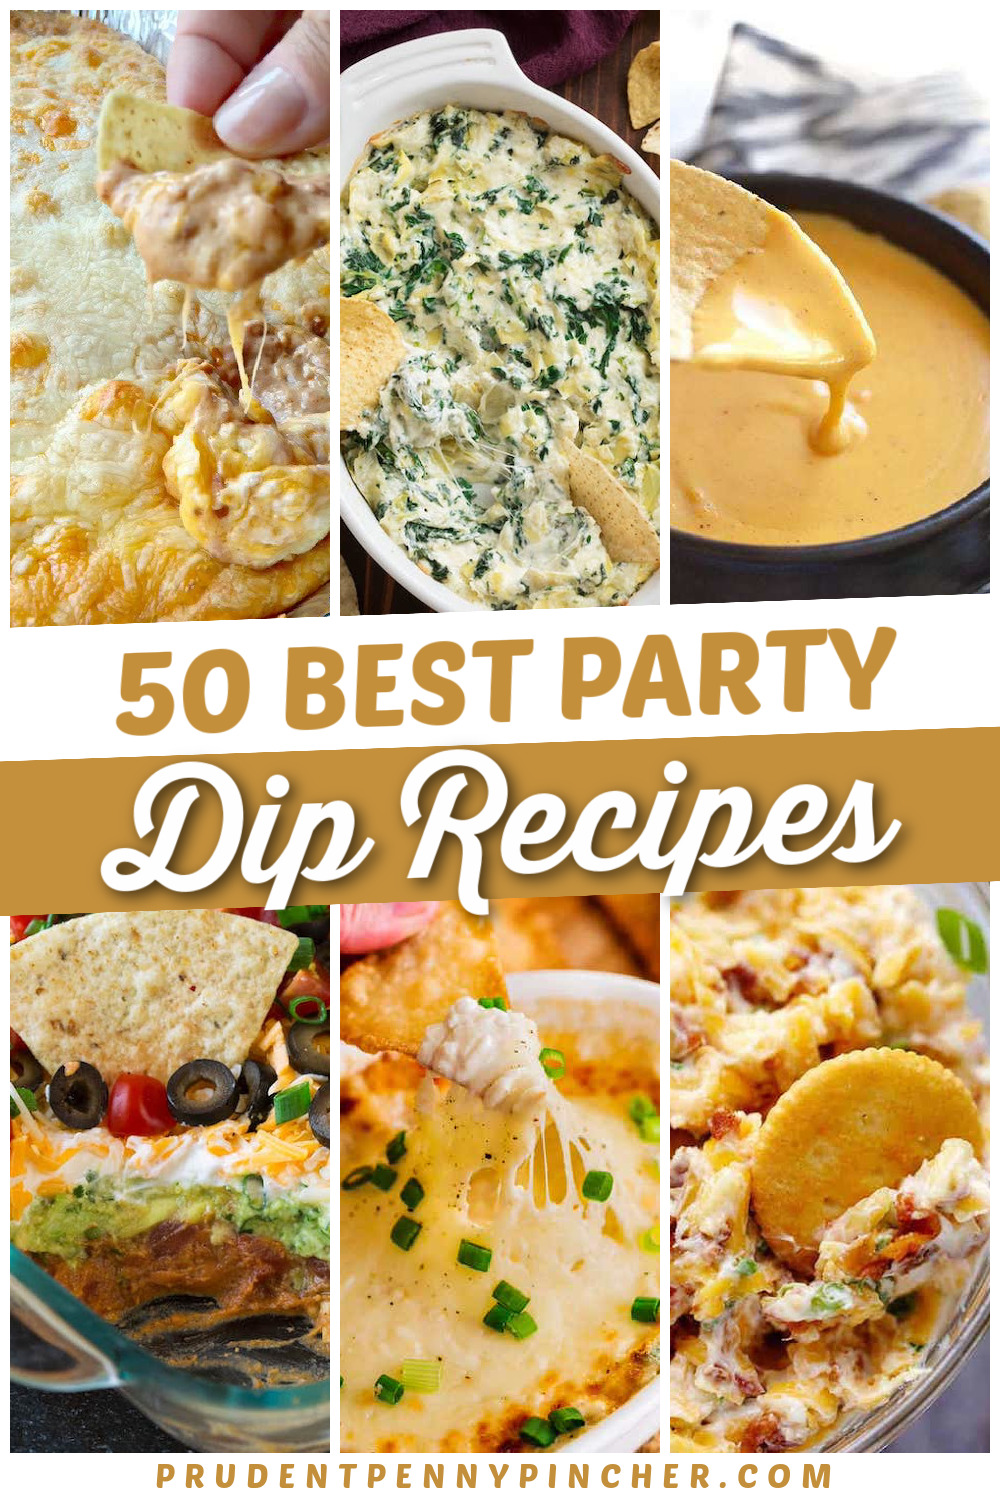 50 Best Party Dip Recipes - Prudent Penny Pincher